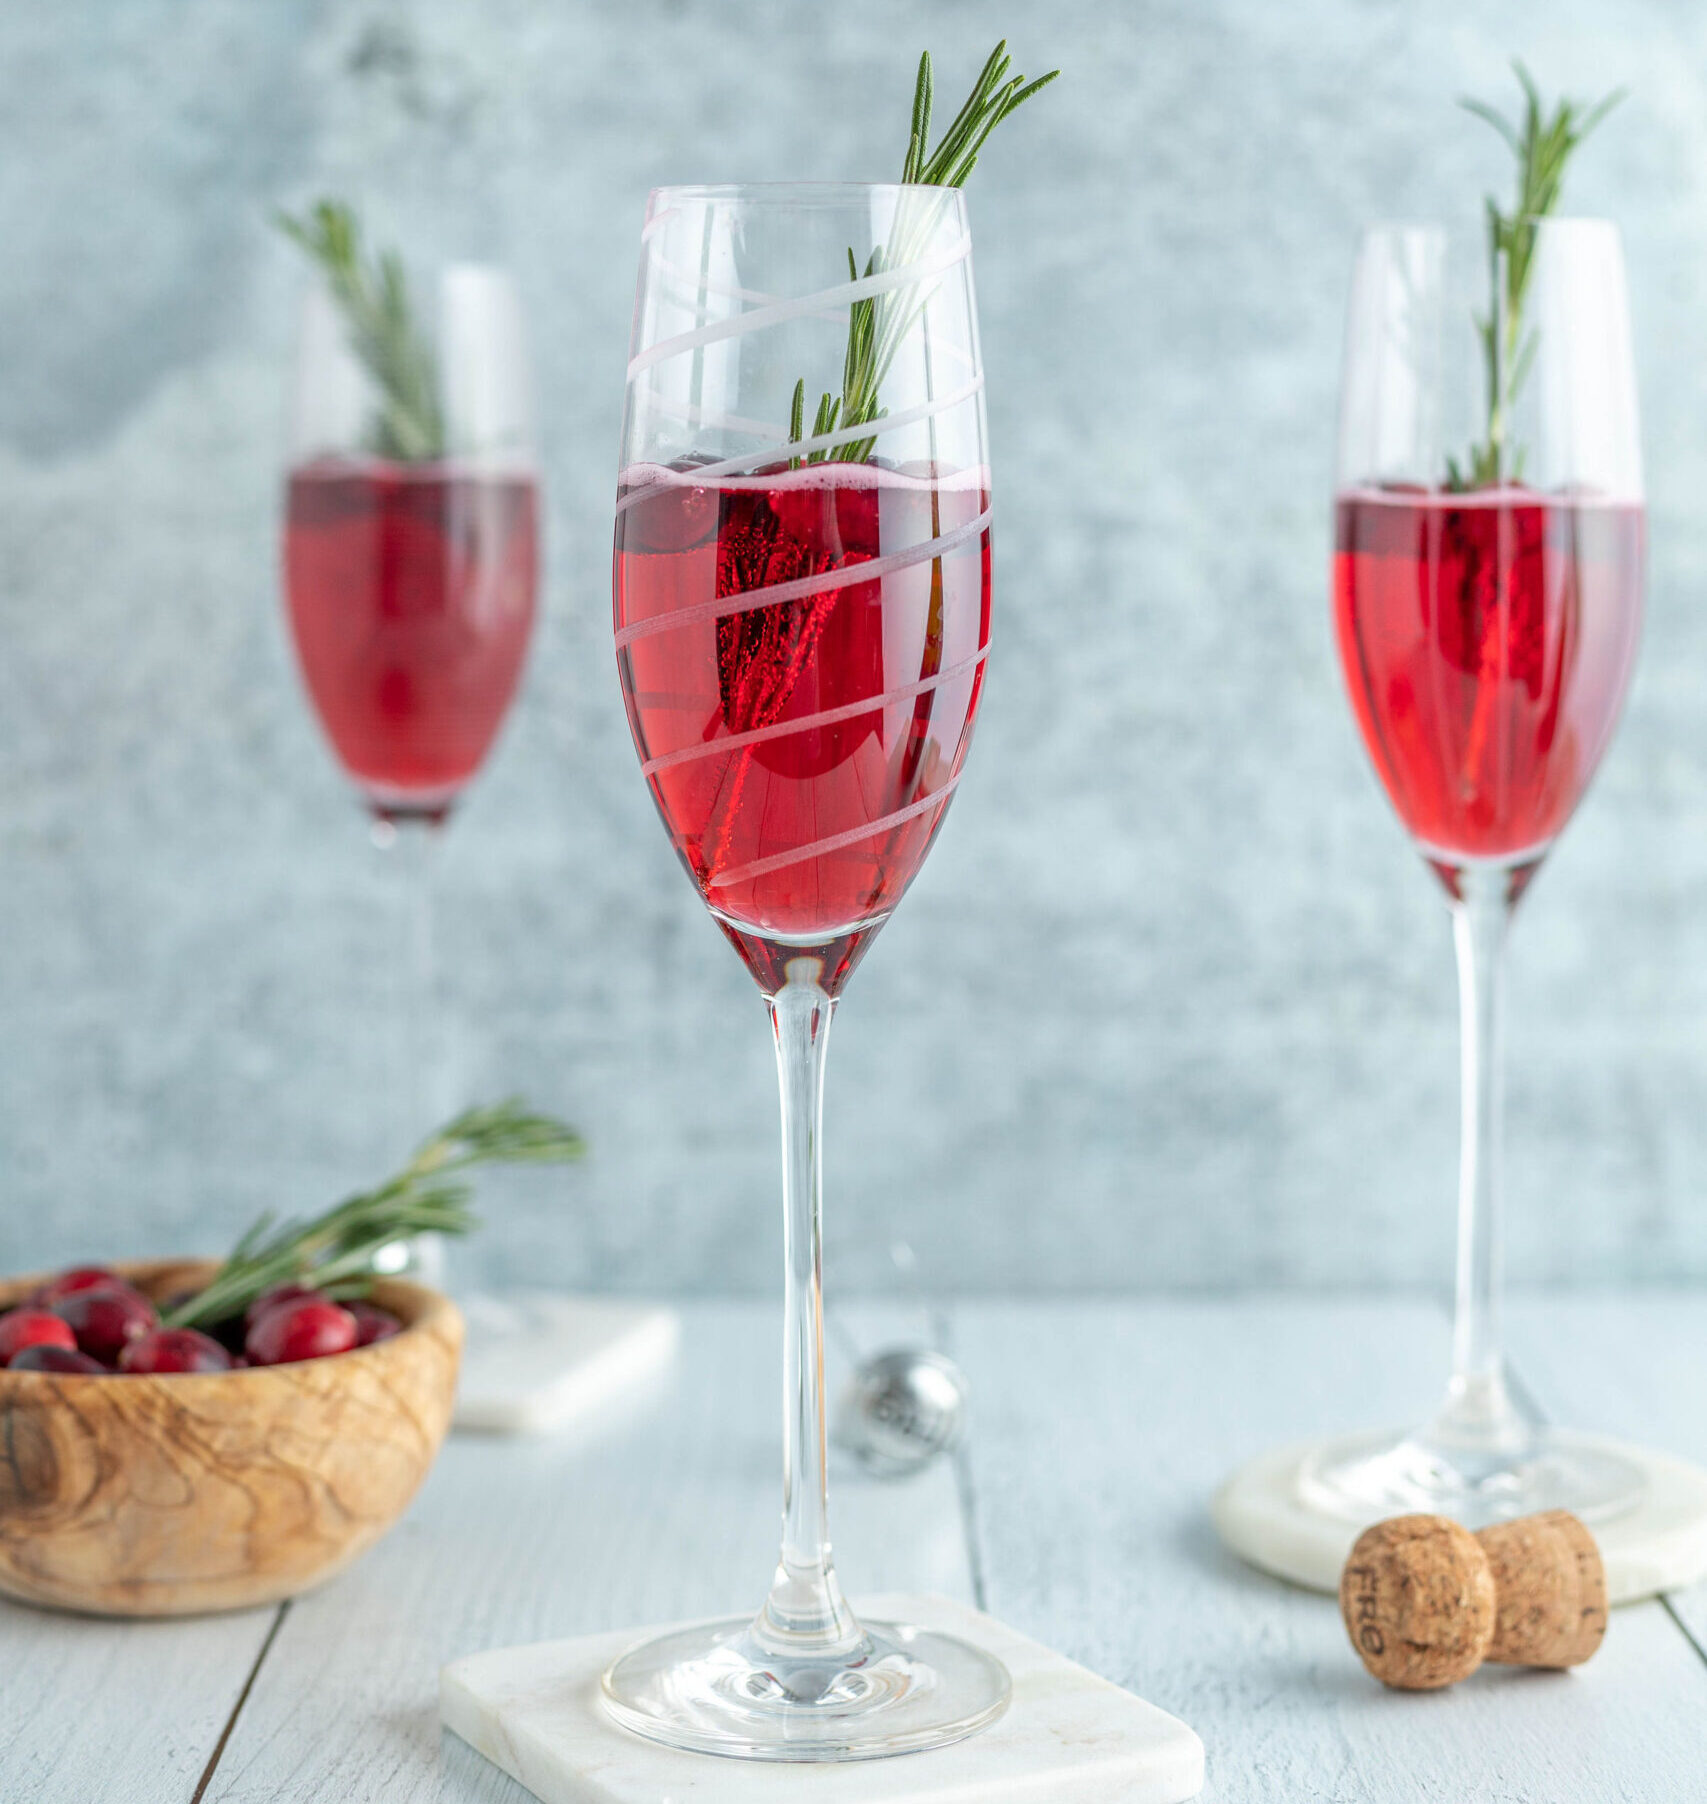 mocktail, mocktails, mocktail recipe, fre wines, non alcoholic cocktails, non alcoholic drinks